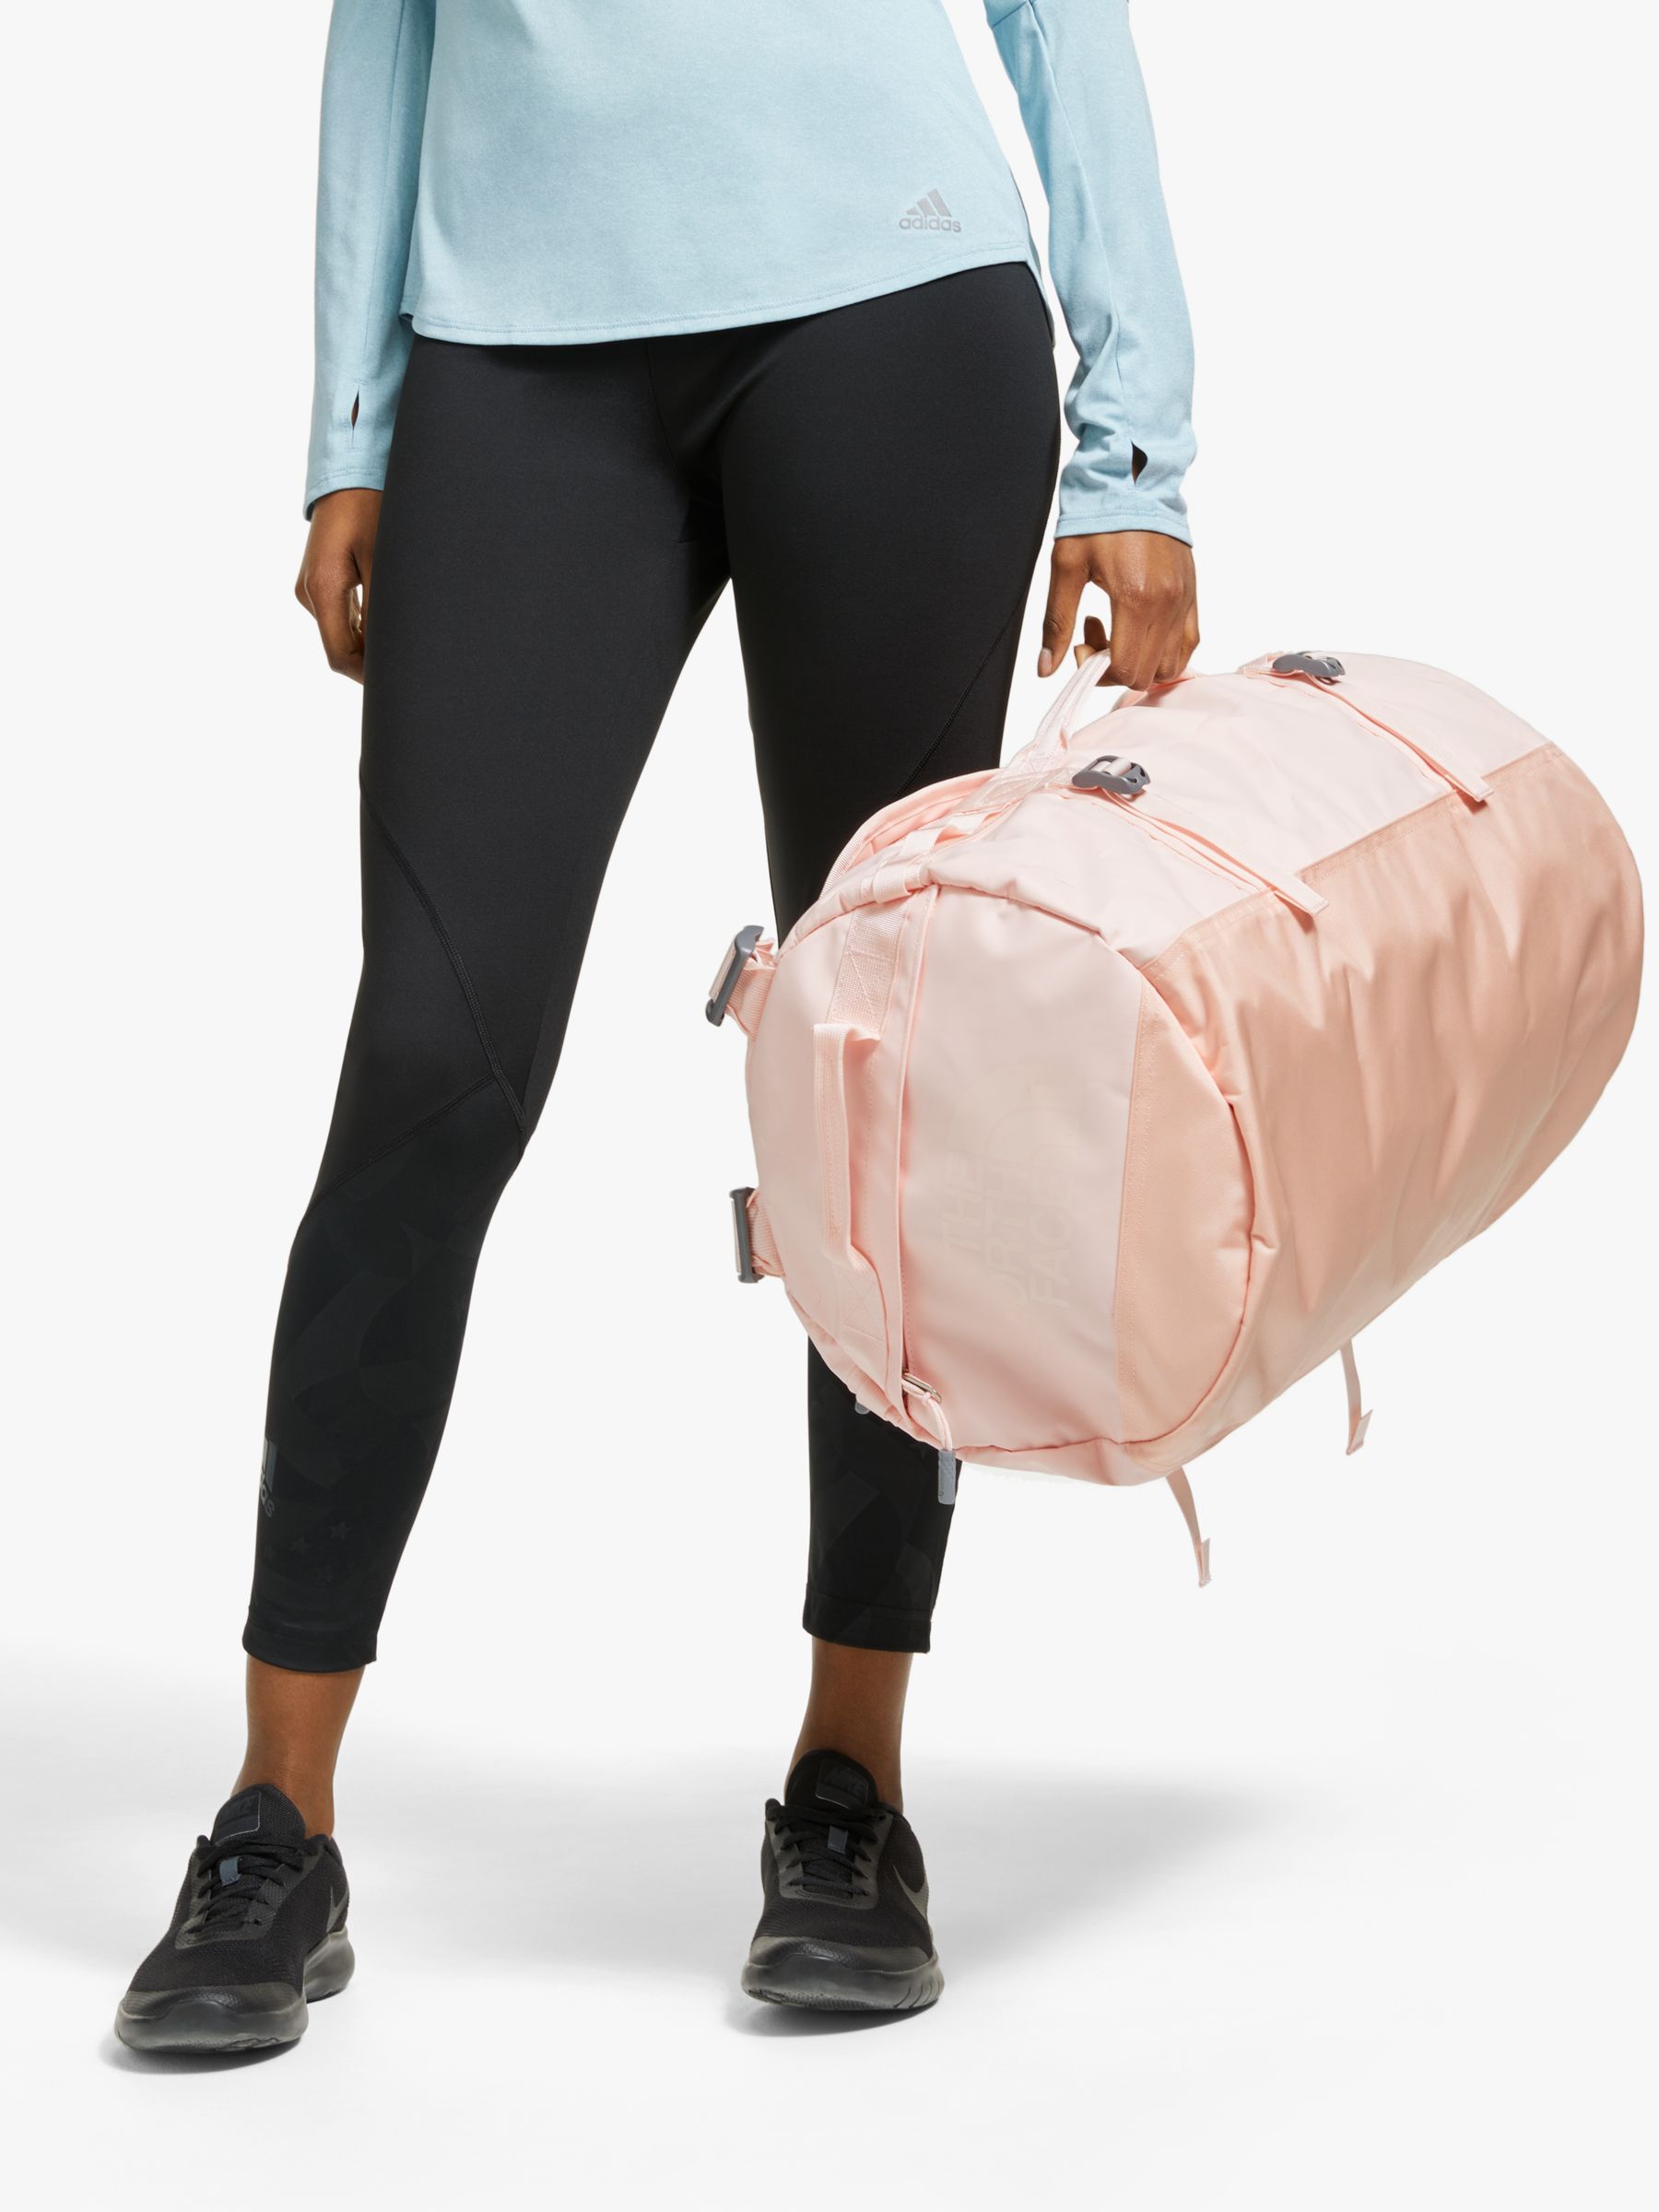 the north face duffel bag pink